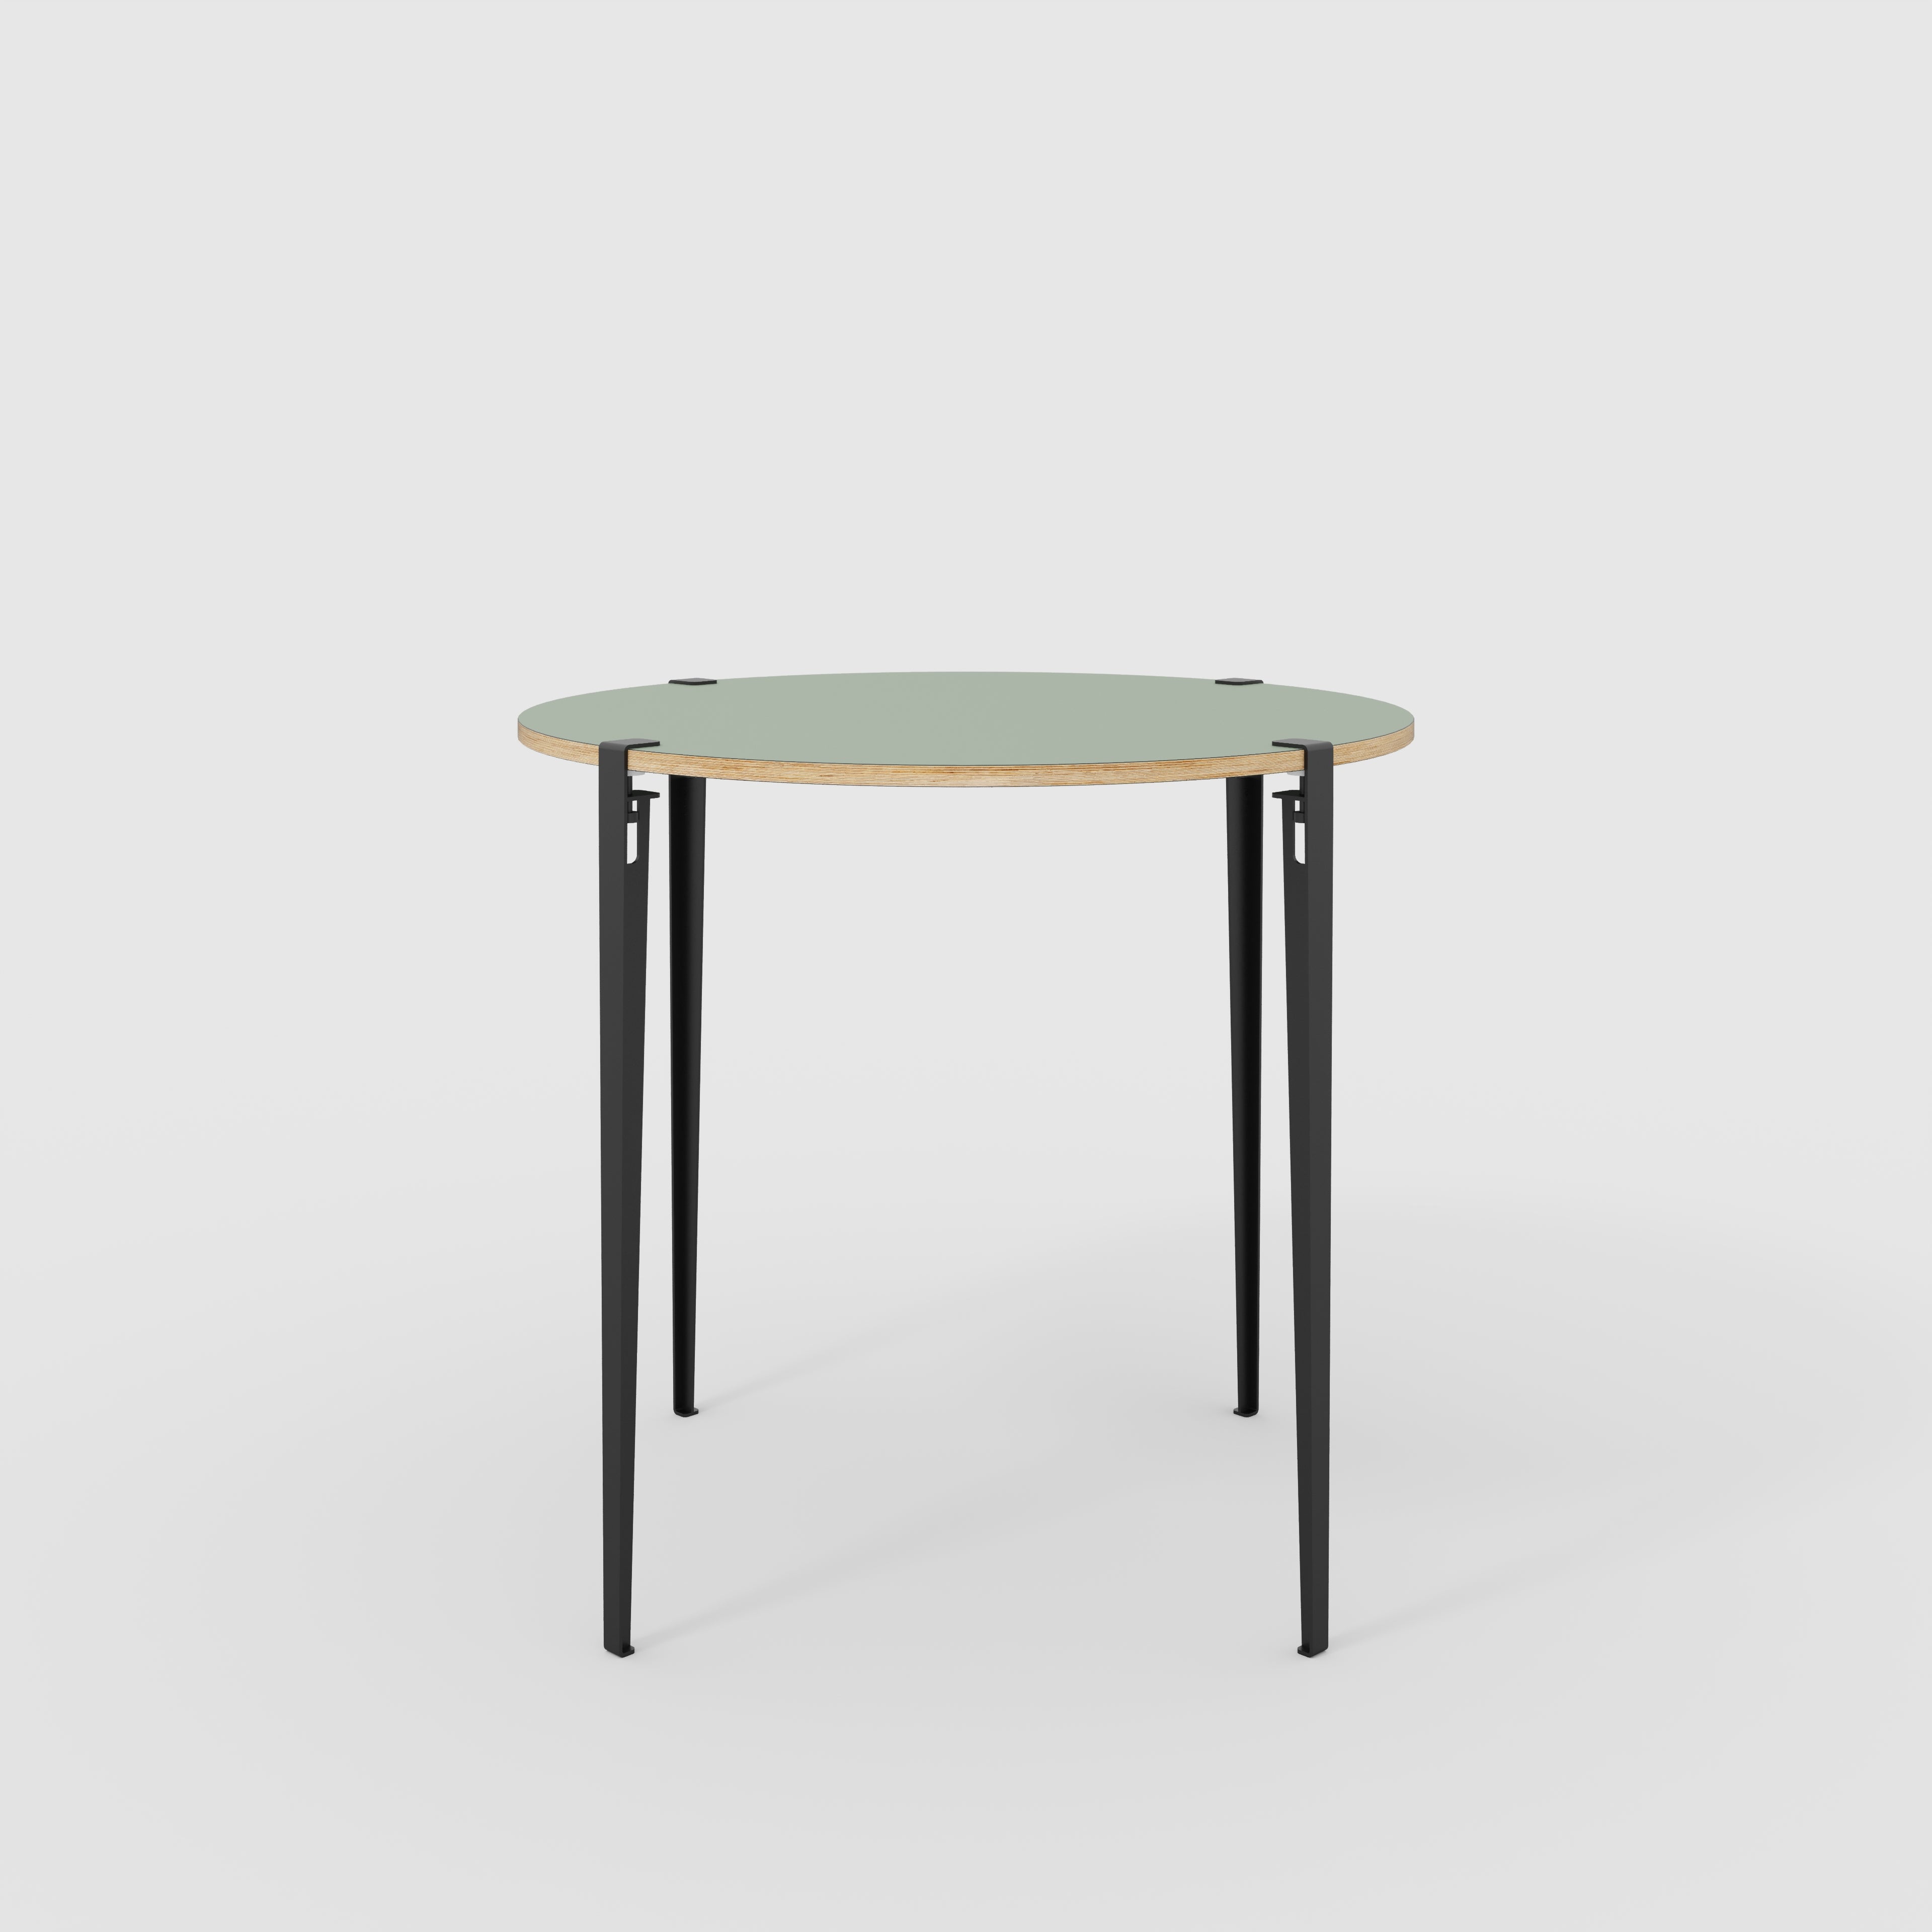 Round Table with Black Tiptoe Legs - Formica Green Slate - 1200(dia) x 1100(h)